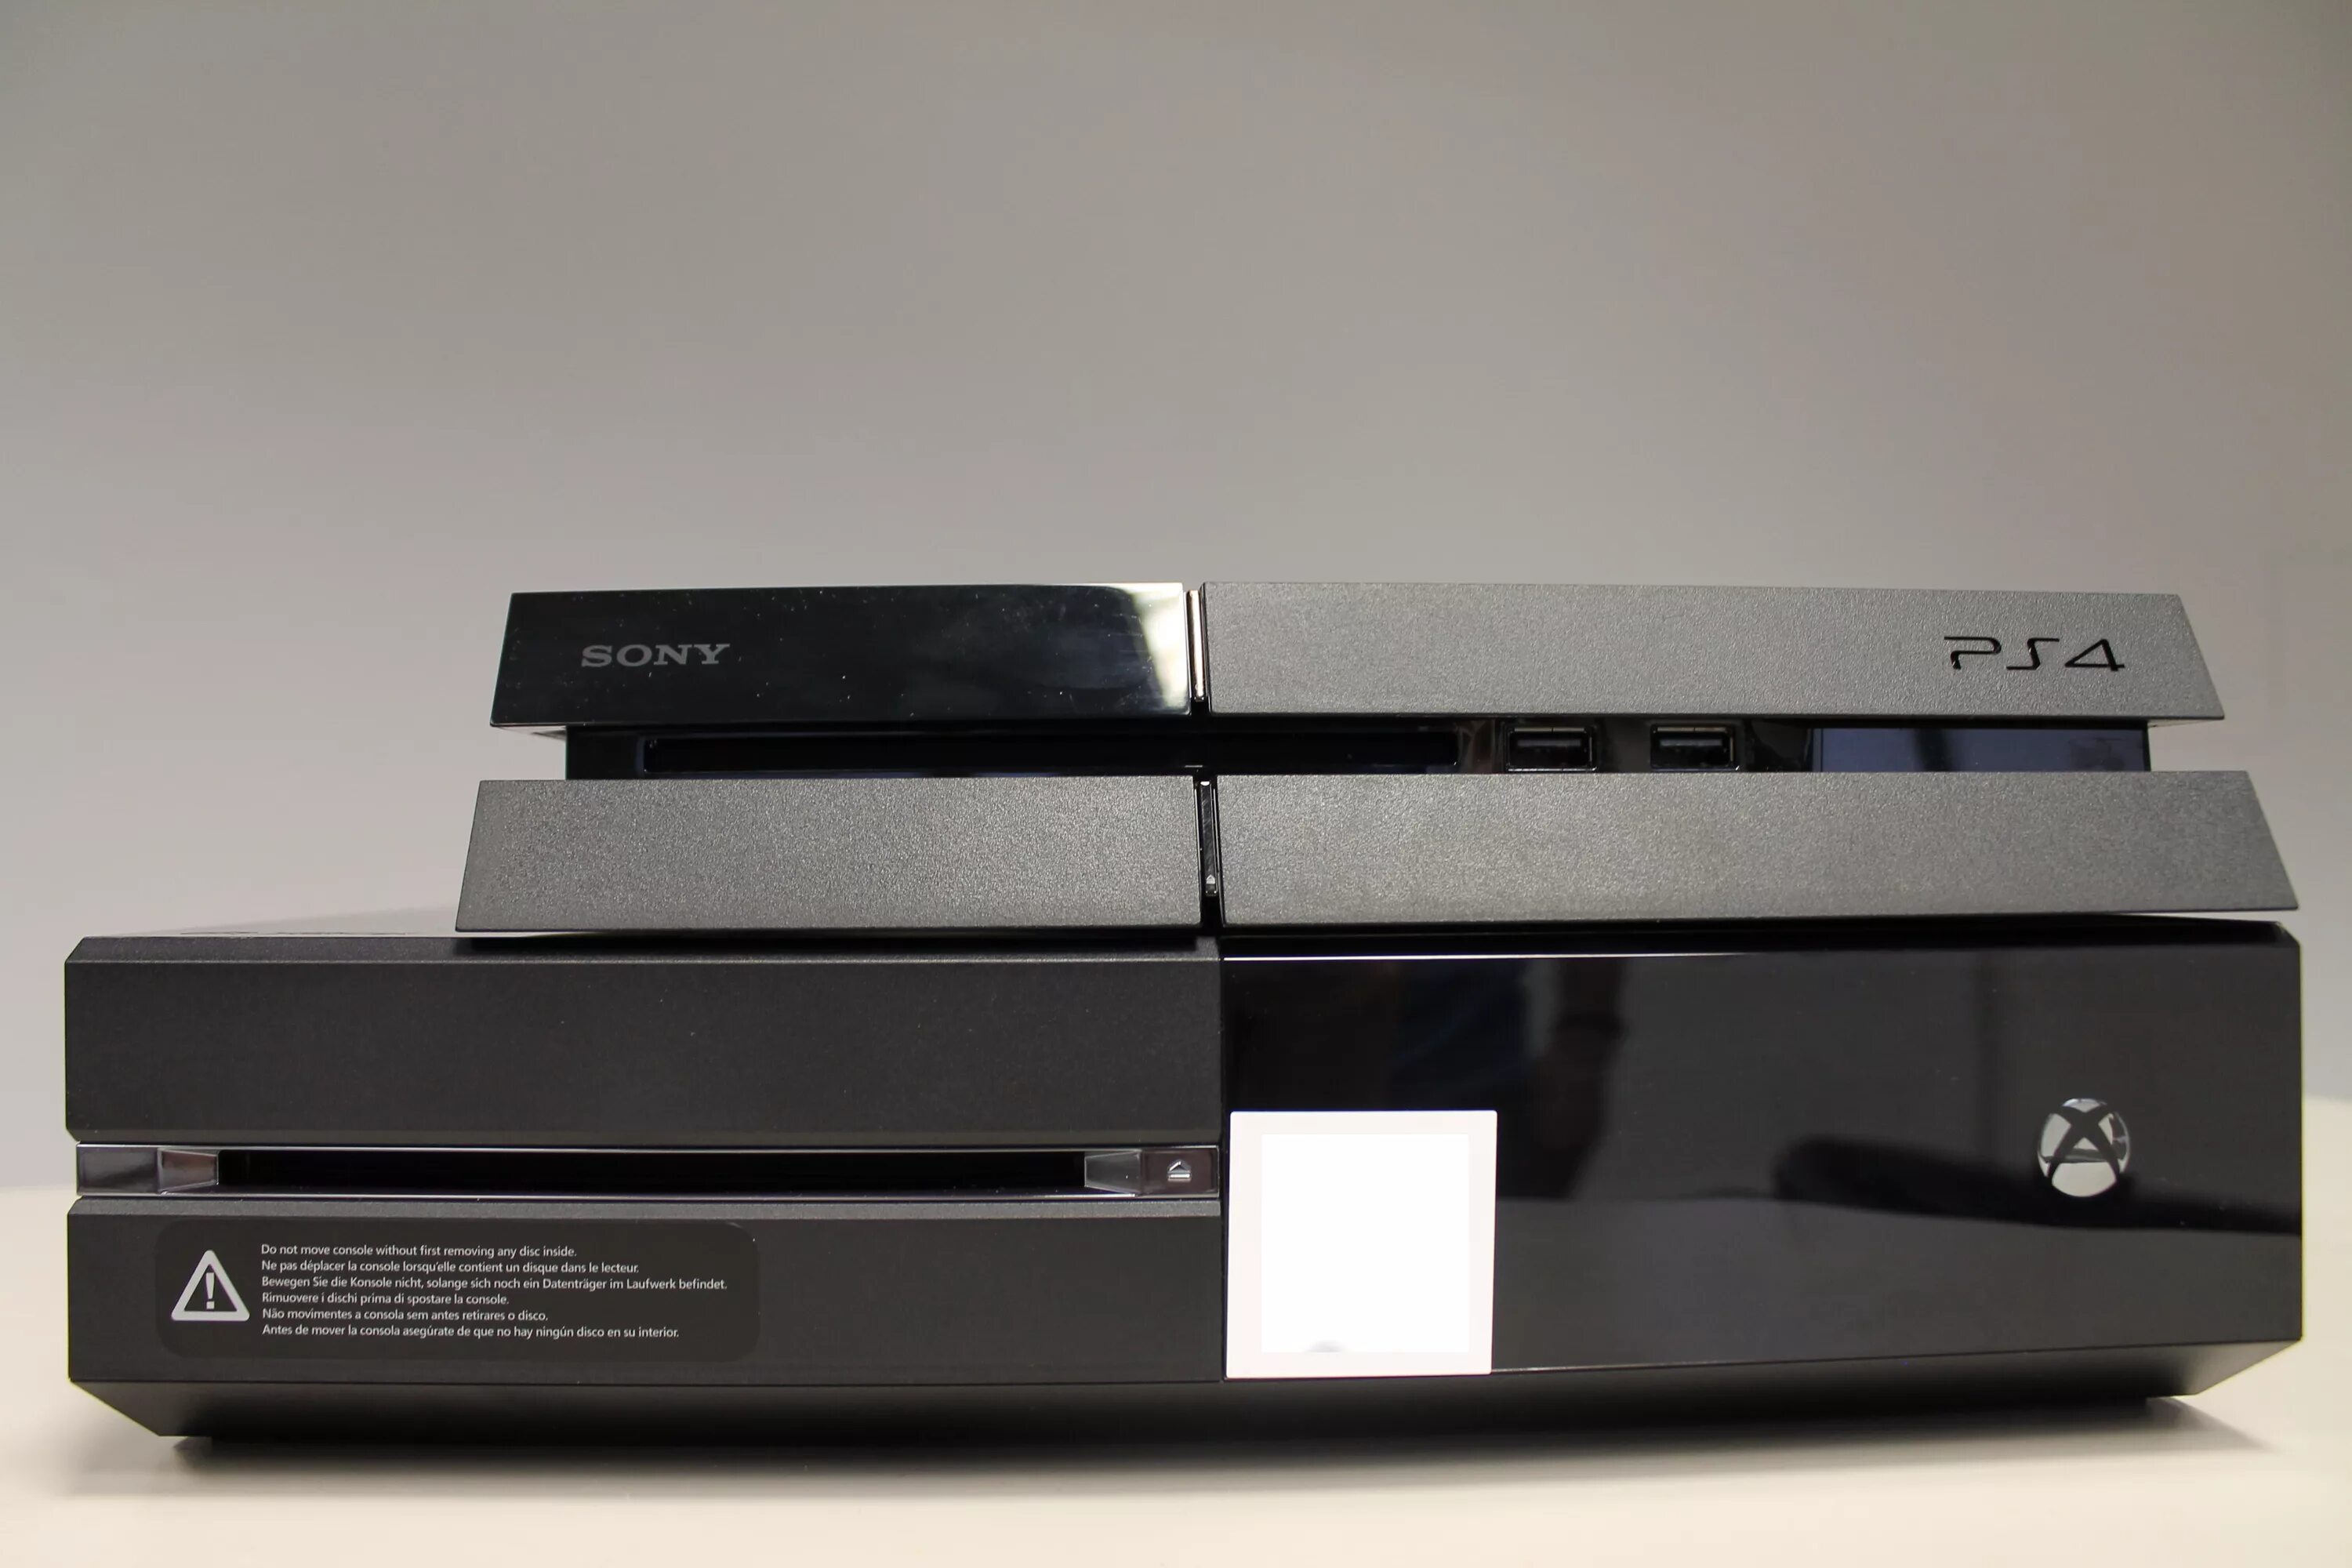 Ps4 Xbox one. Габариты пс4 фат. ПСП 4 фат. Xbox one fat.